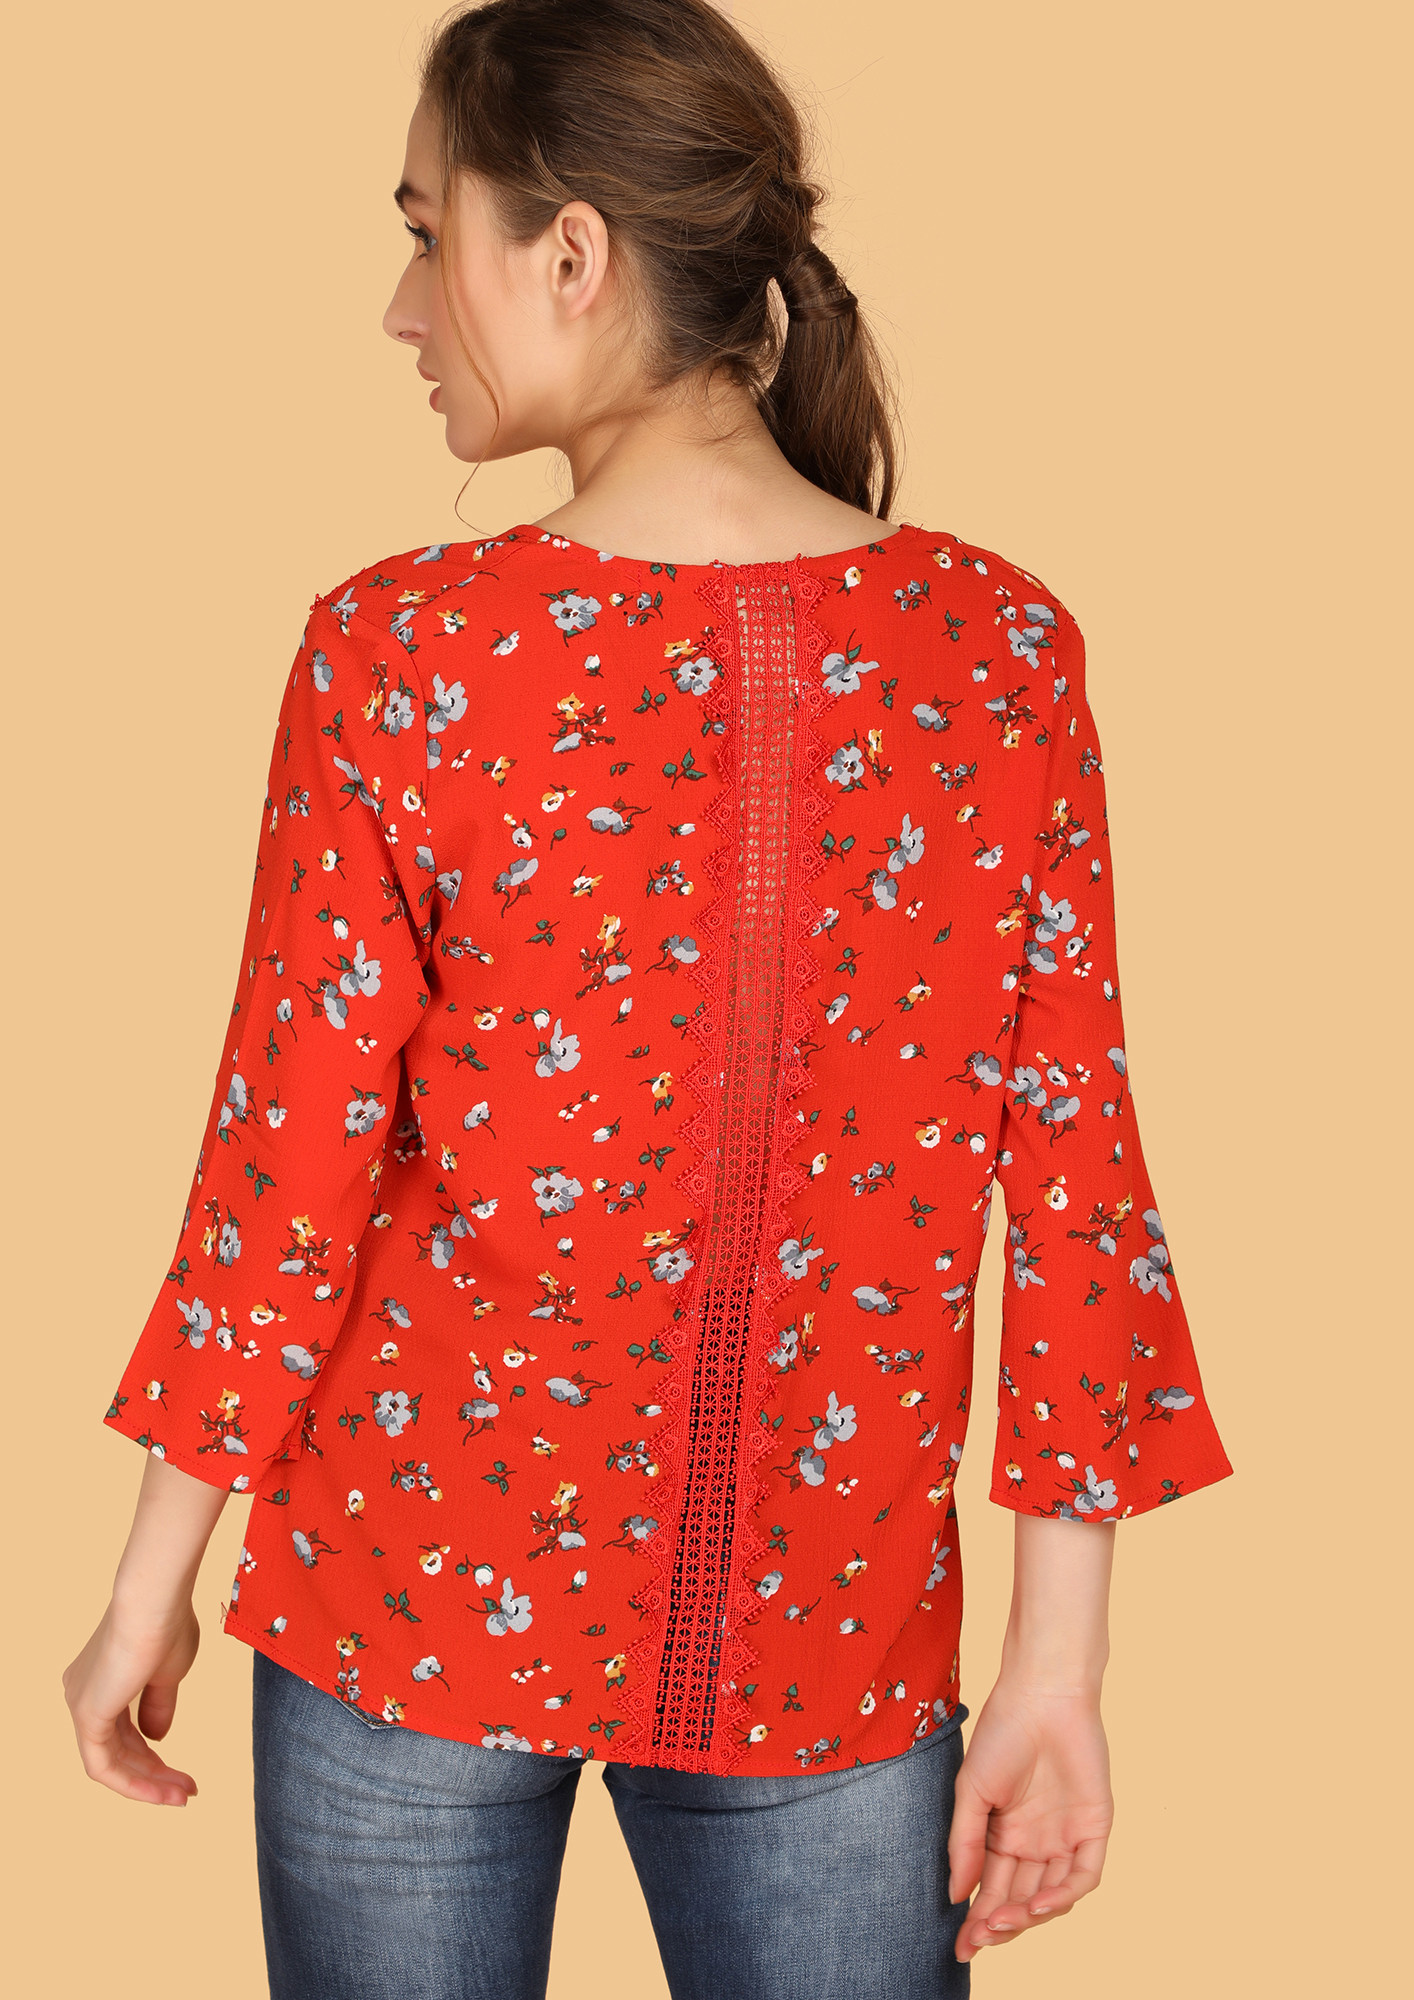 GET READY FOR BUTTERFLY ATTACK RED TOP